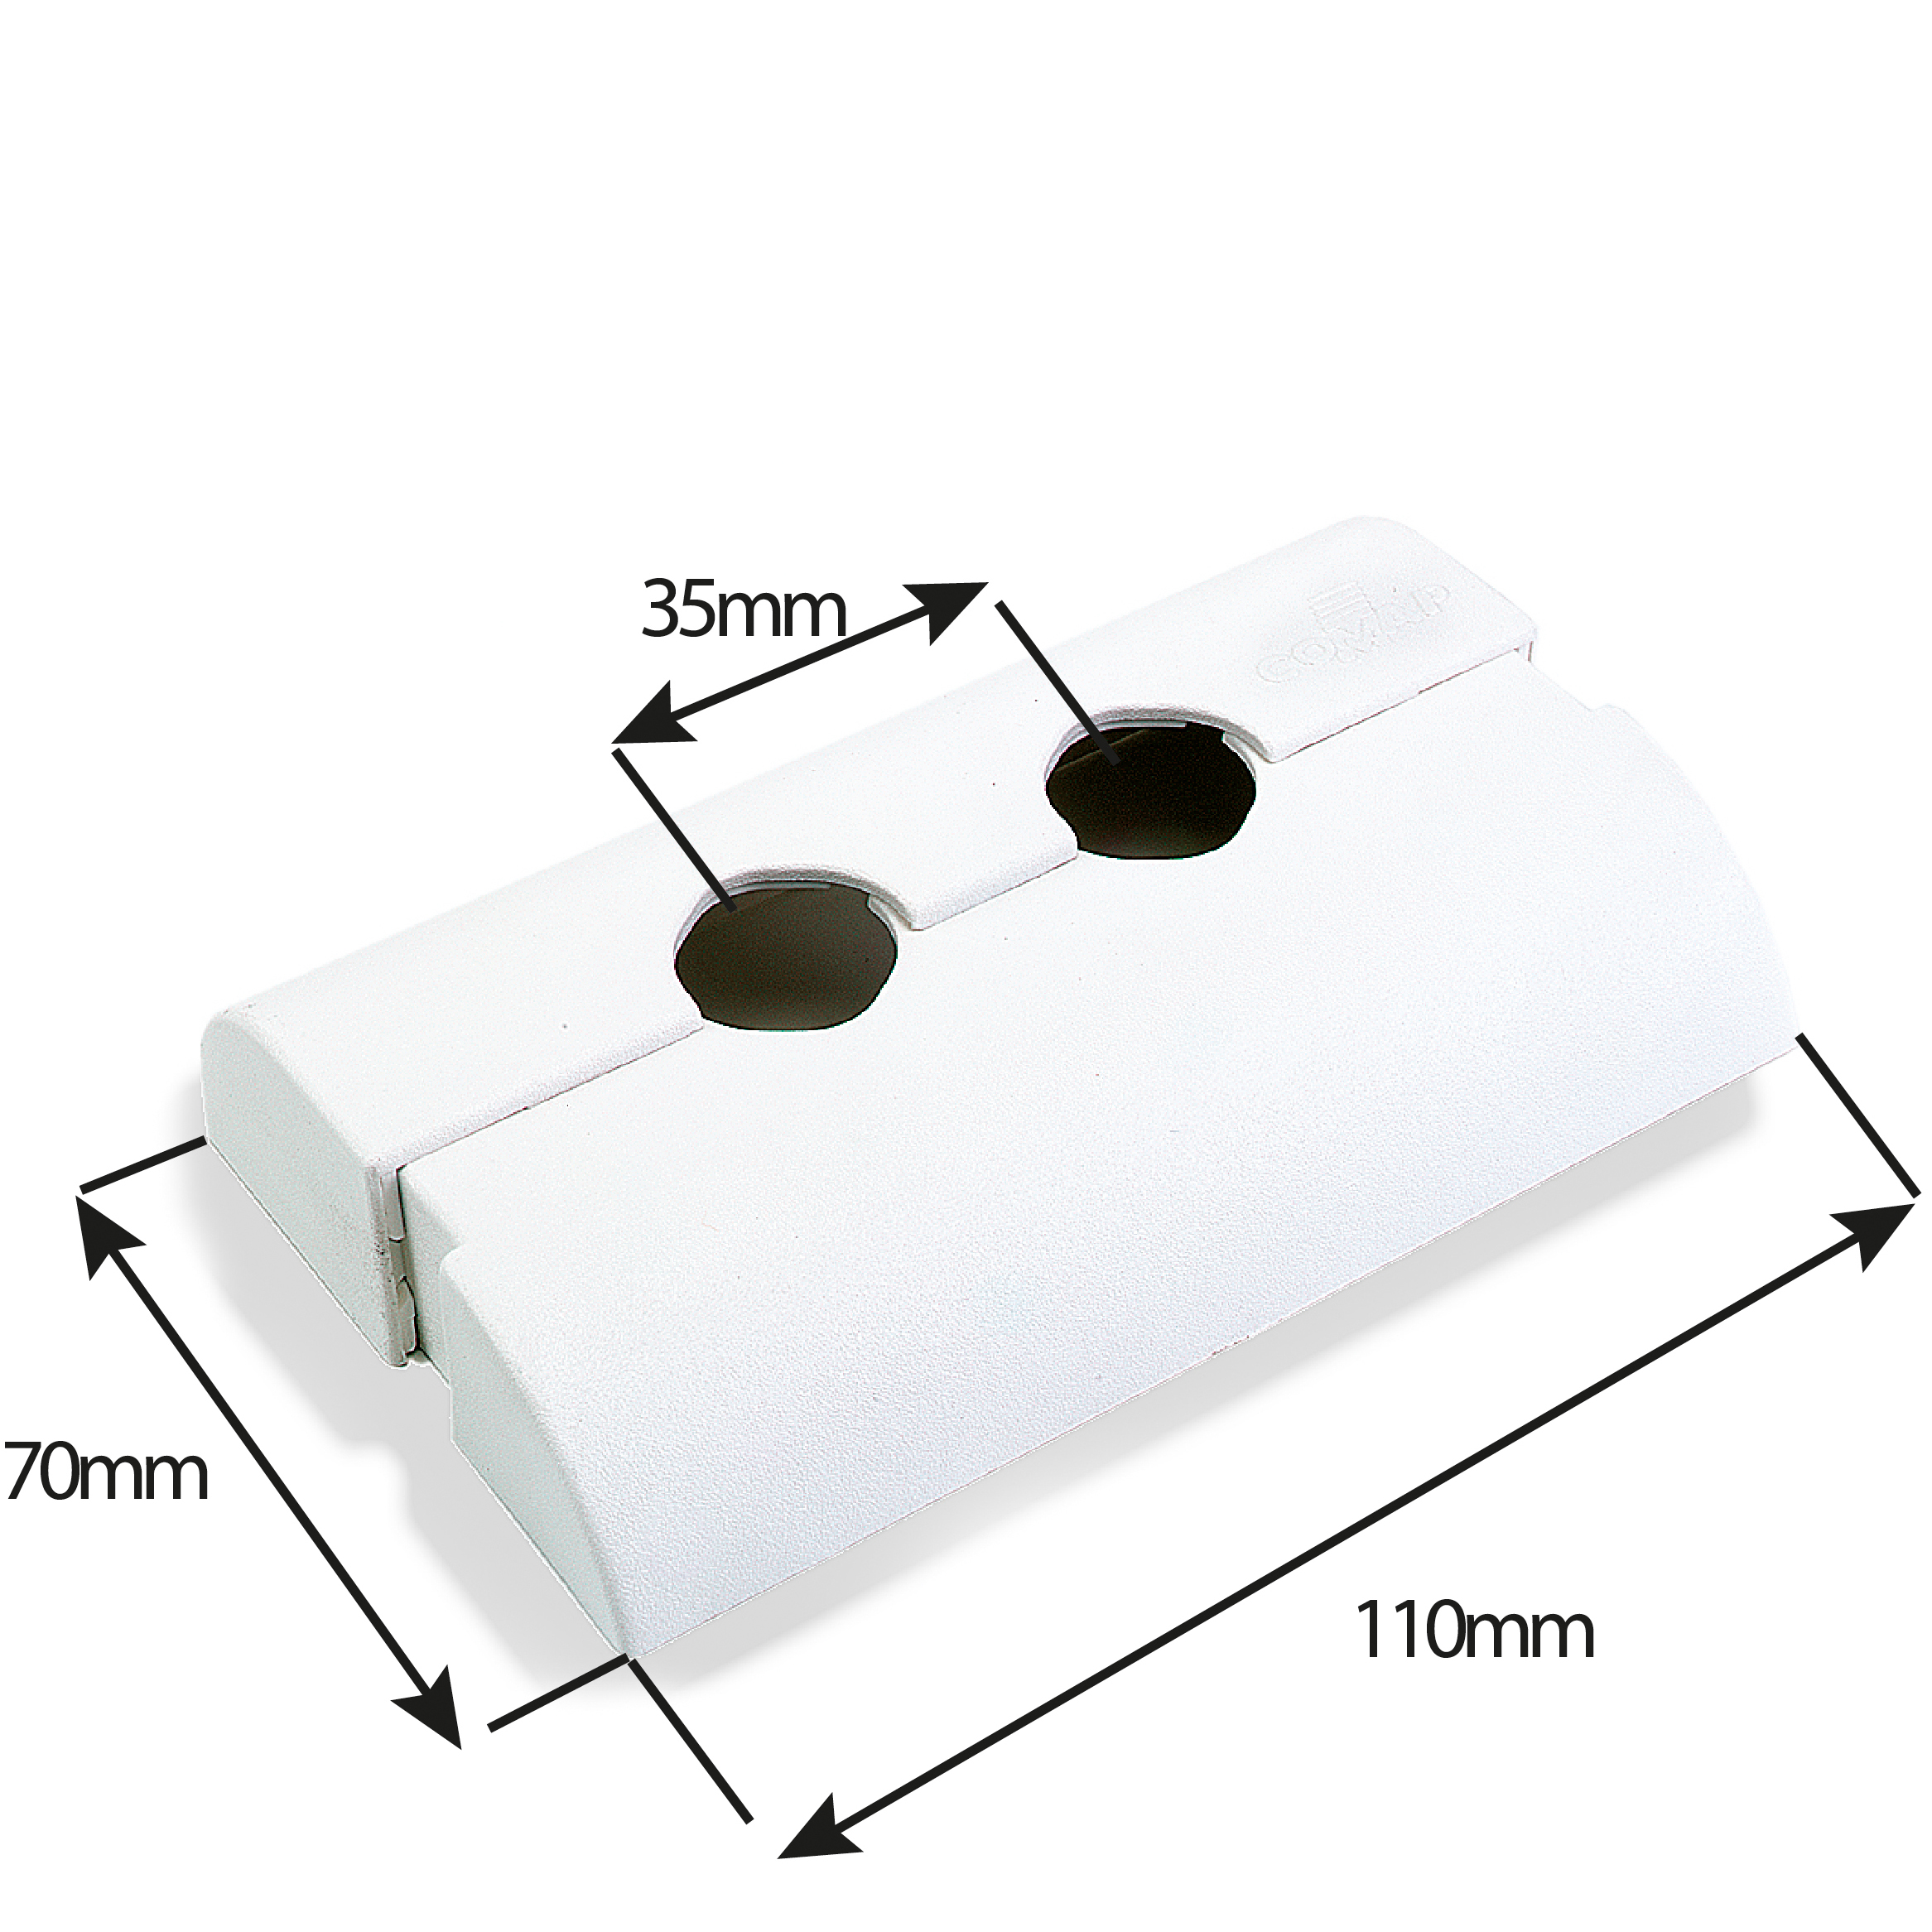 985500 Double Cover plate - For boxes 9841 or 9847, and bracket 9504 Adjustable from 10 to 18mm pipe diameter